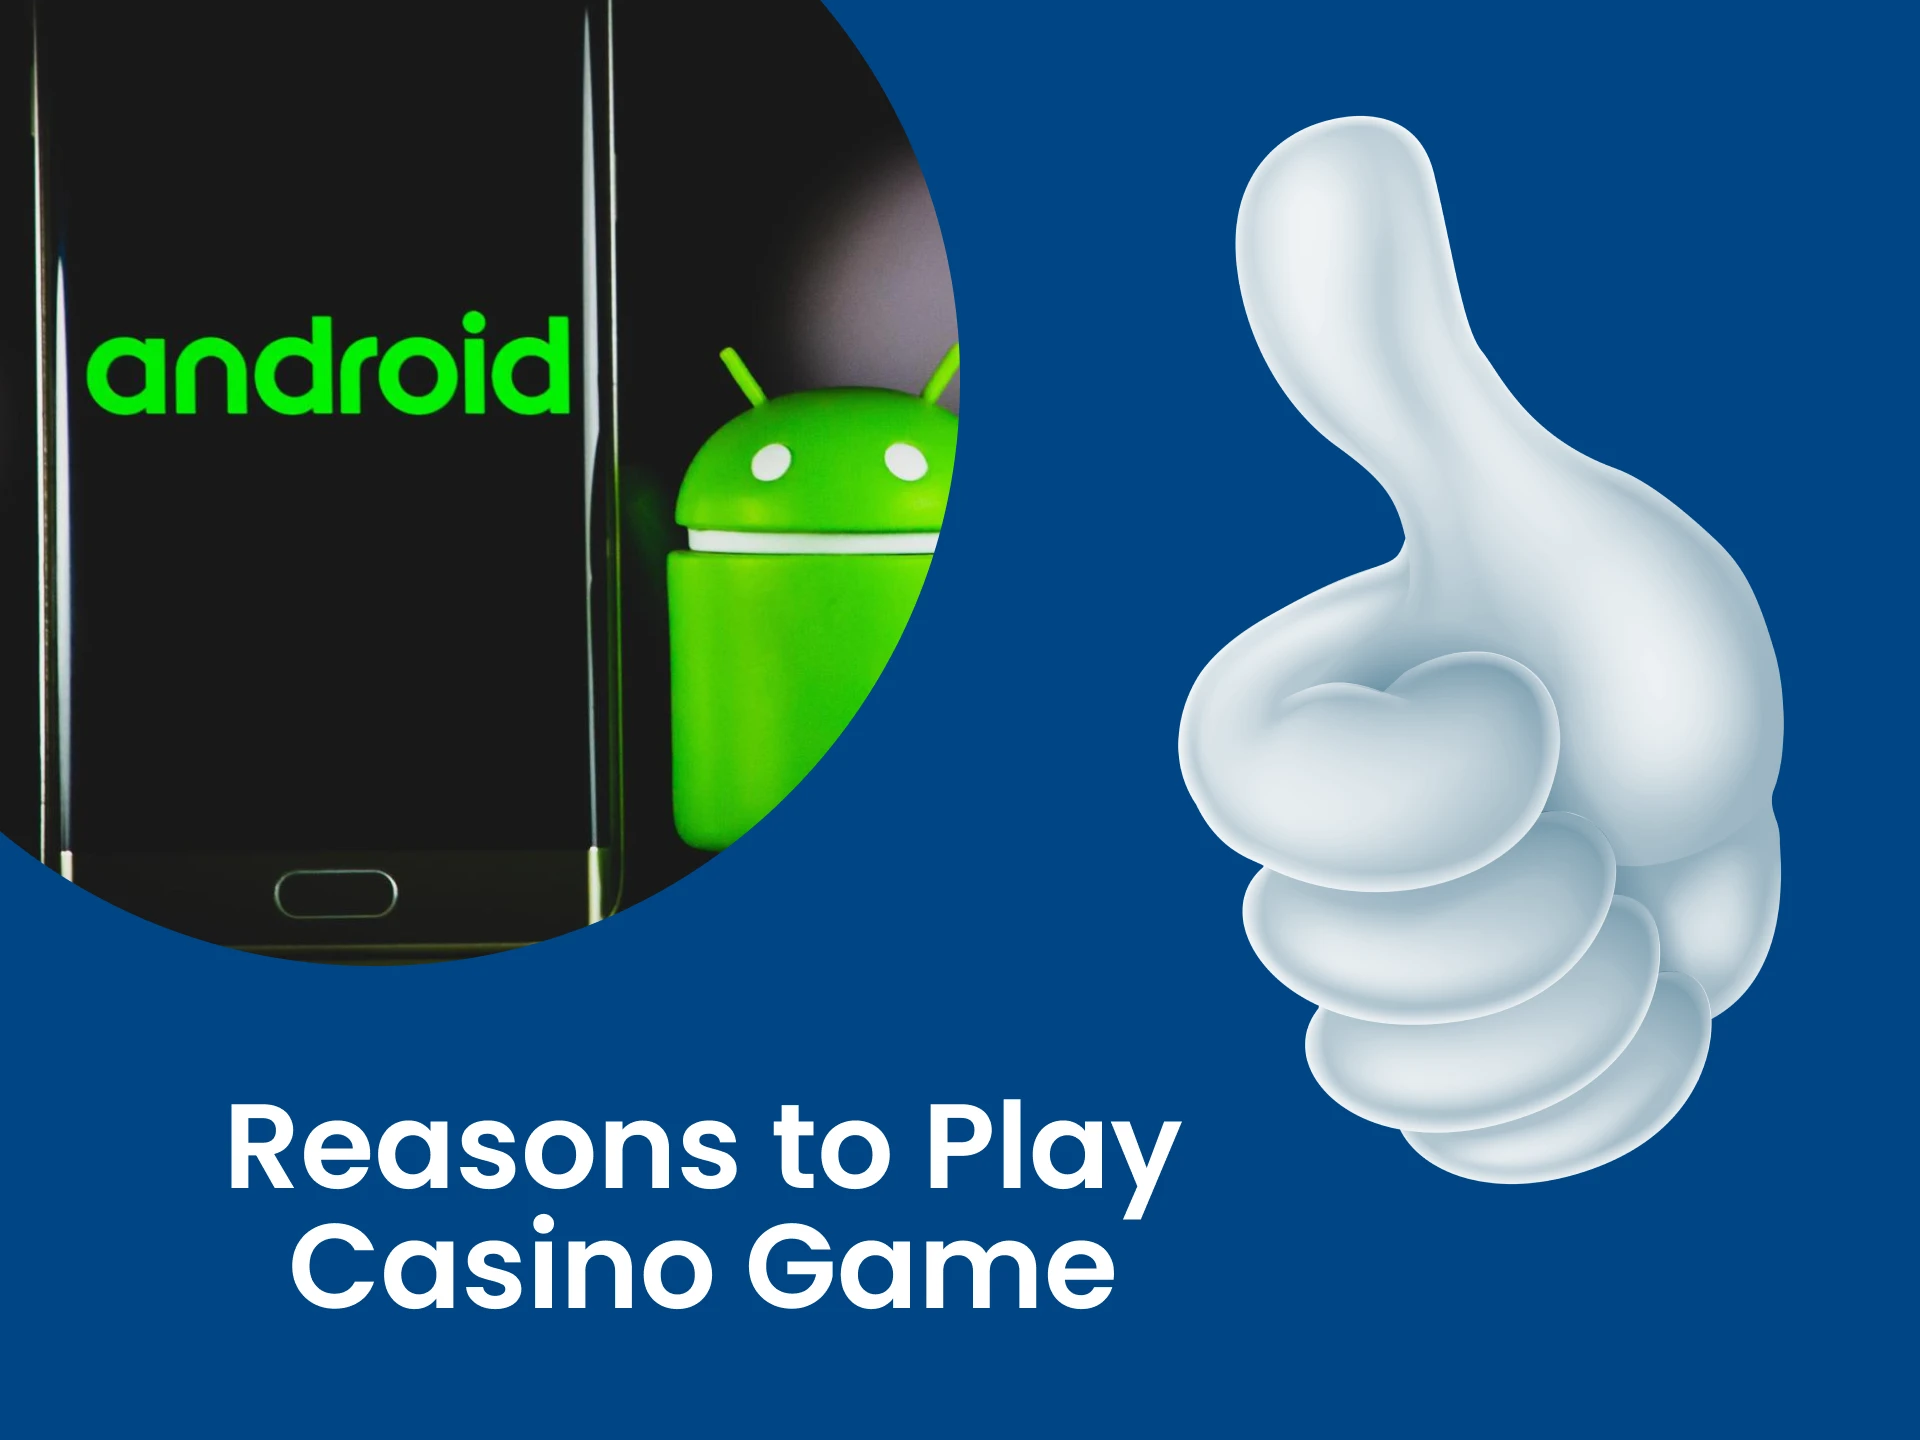 Find out why you should play in a casino through Android applications.